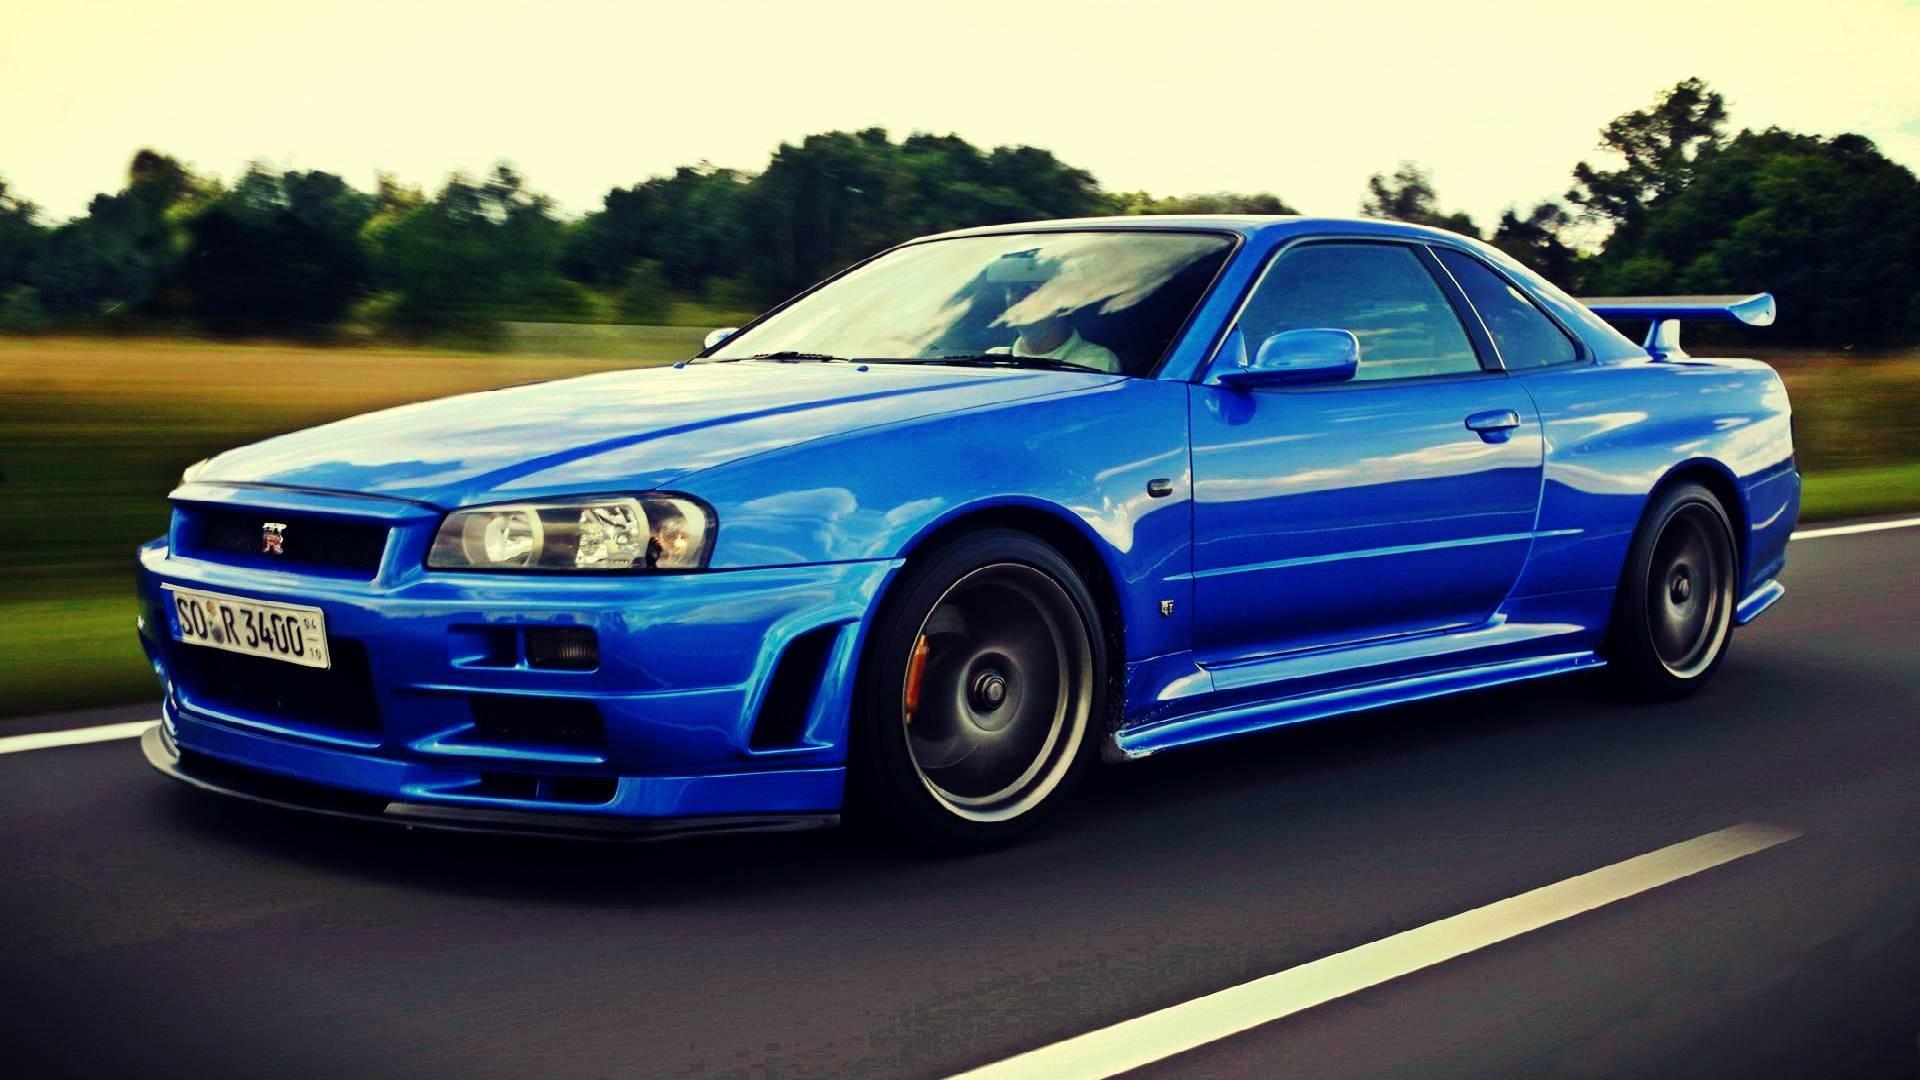 R34 Gtr Wallpaper background picture